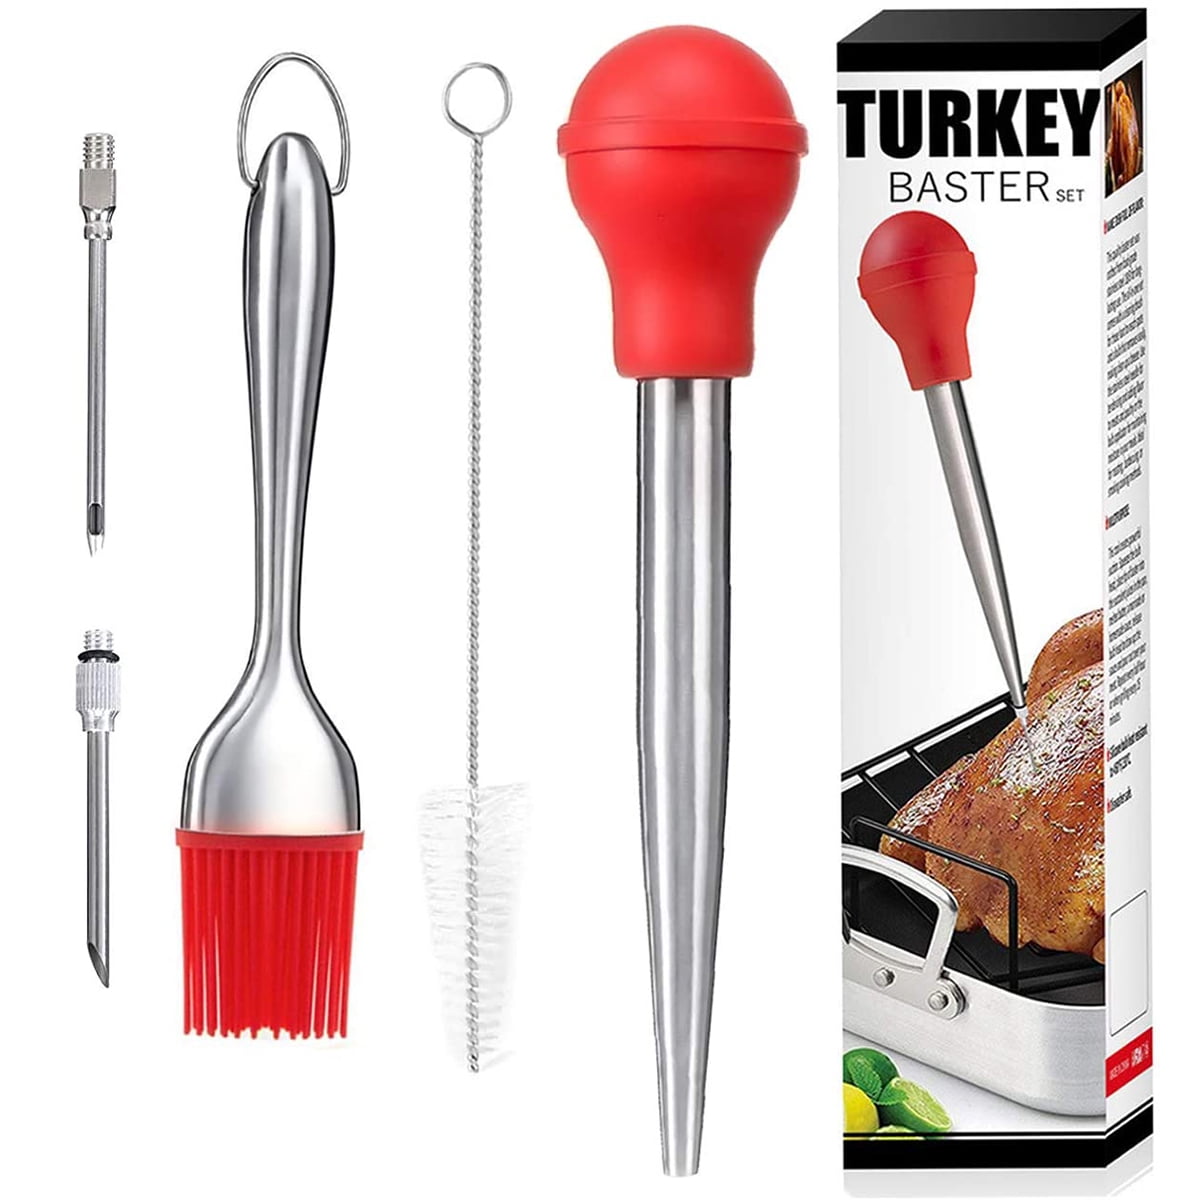 Tender Meat BPA Free Pro Grade Turkey Baster 6 Pack Best Plastic Suction Basting Syringe Kitchen Tools and Supplies Extra Large 11 Inch Bulb Basters with Measuring Lines Perfect for Cooking Juicy 